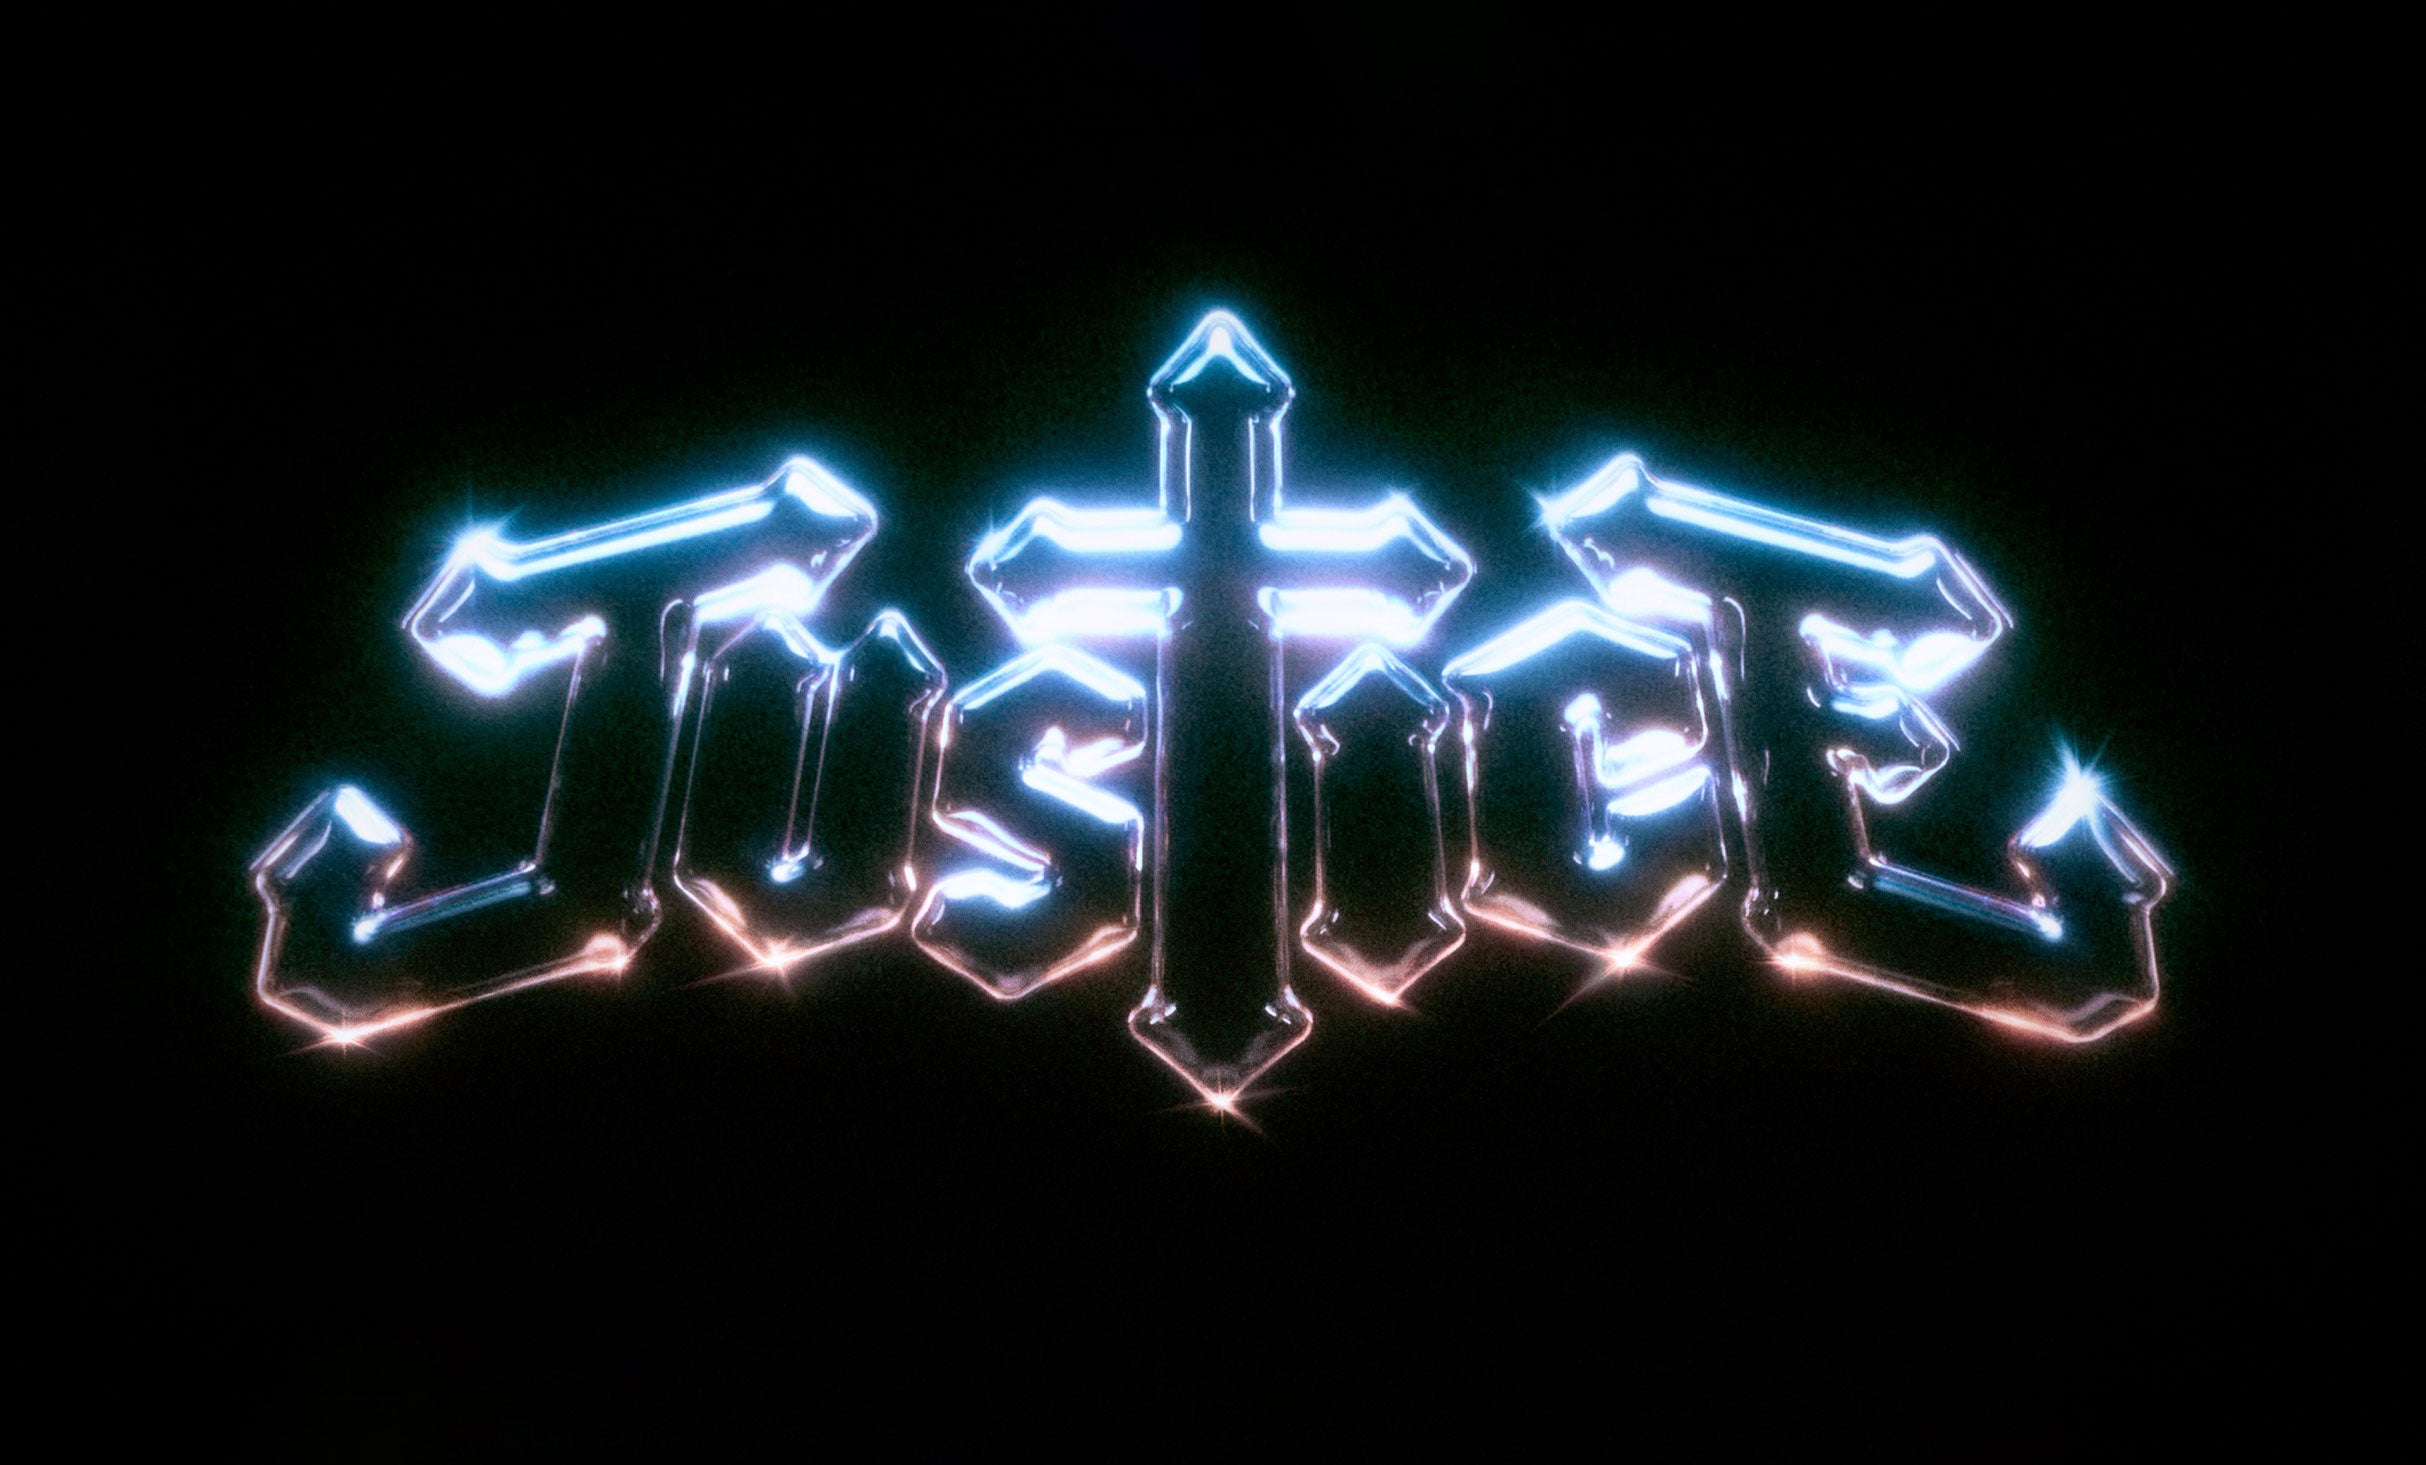 Justice: Live at The Met Presented by Highmark